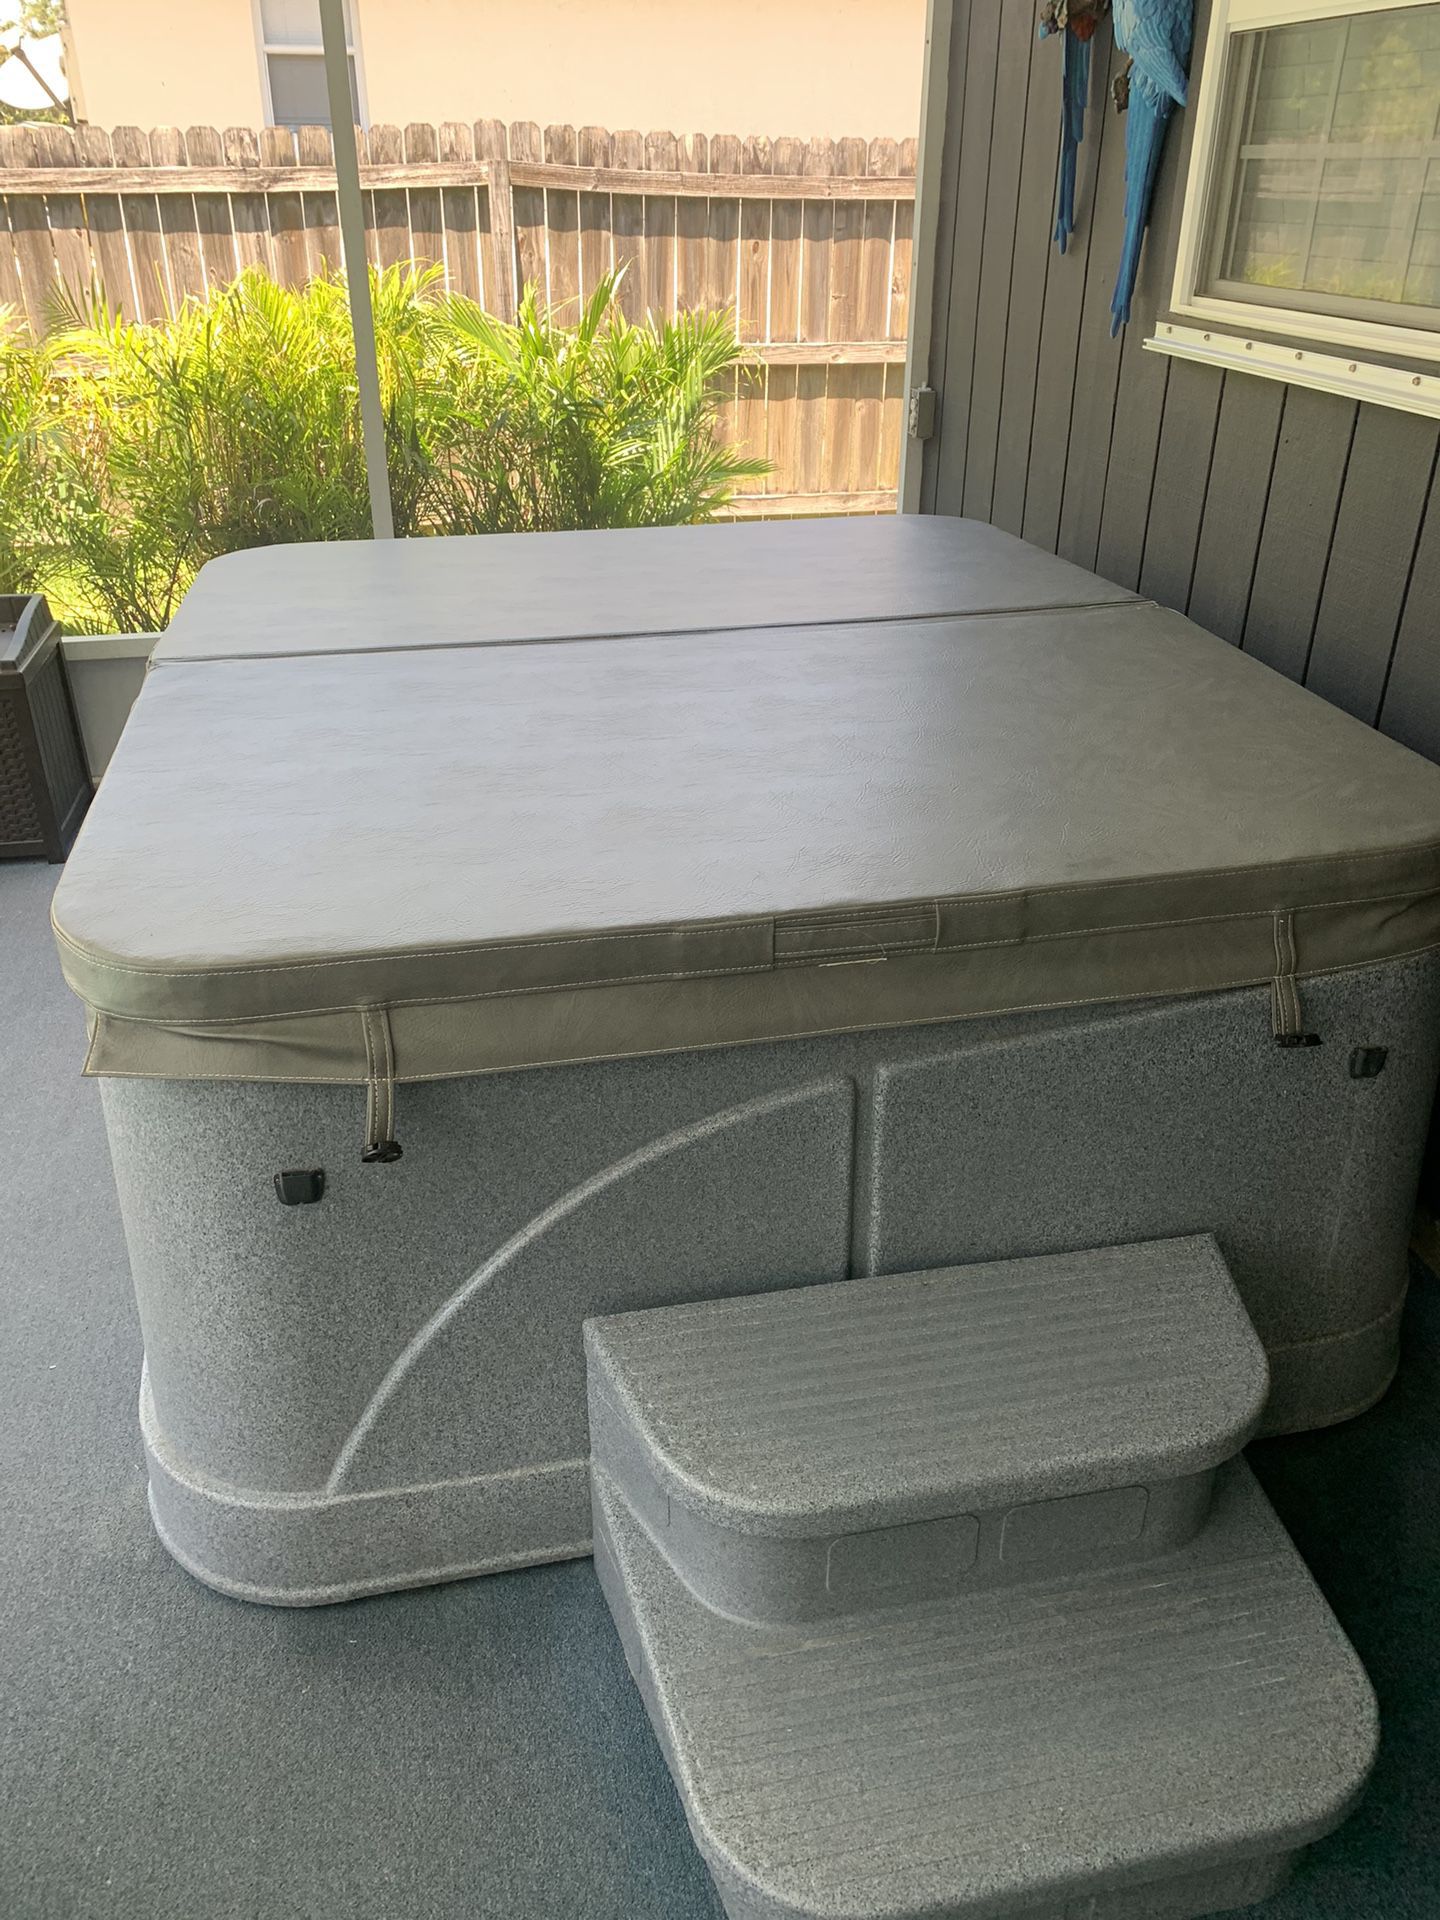 4 Person  Hot Tub (needs Pump Replaced)